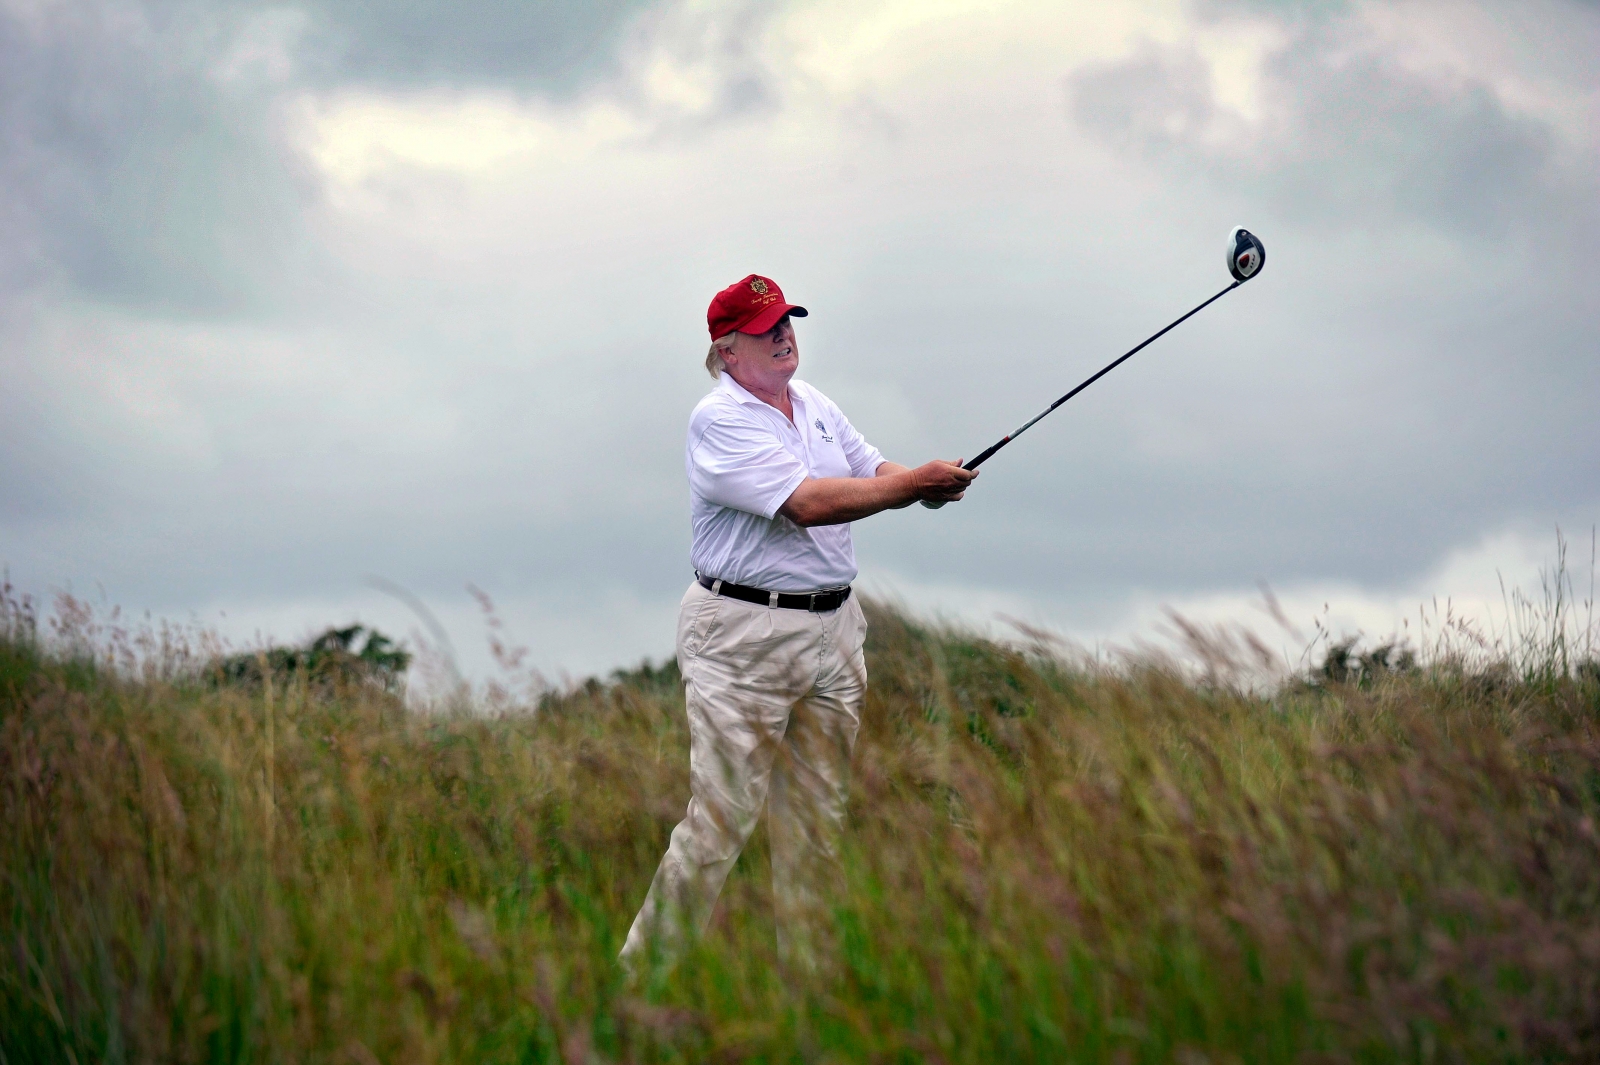 Grandmother says Donald Trump's staff filmed her urinating on golf course